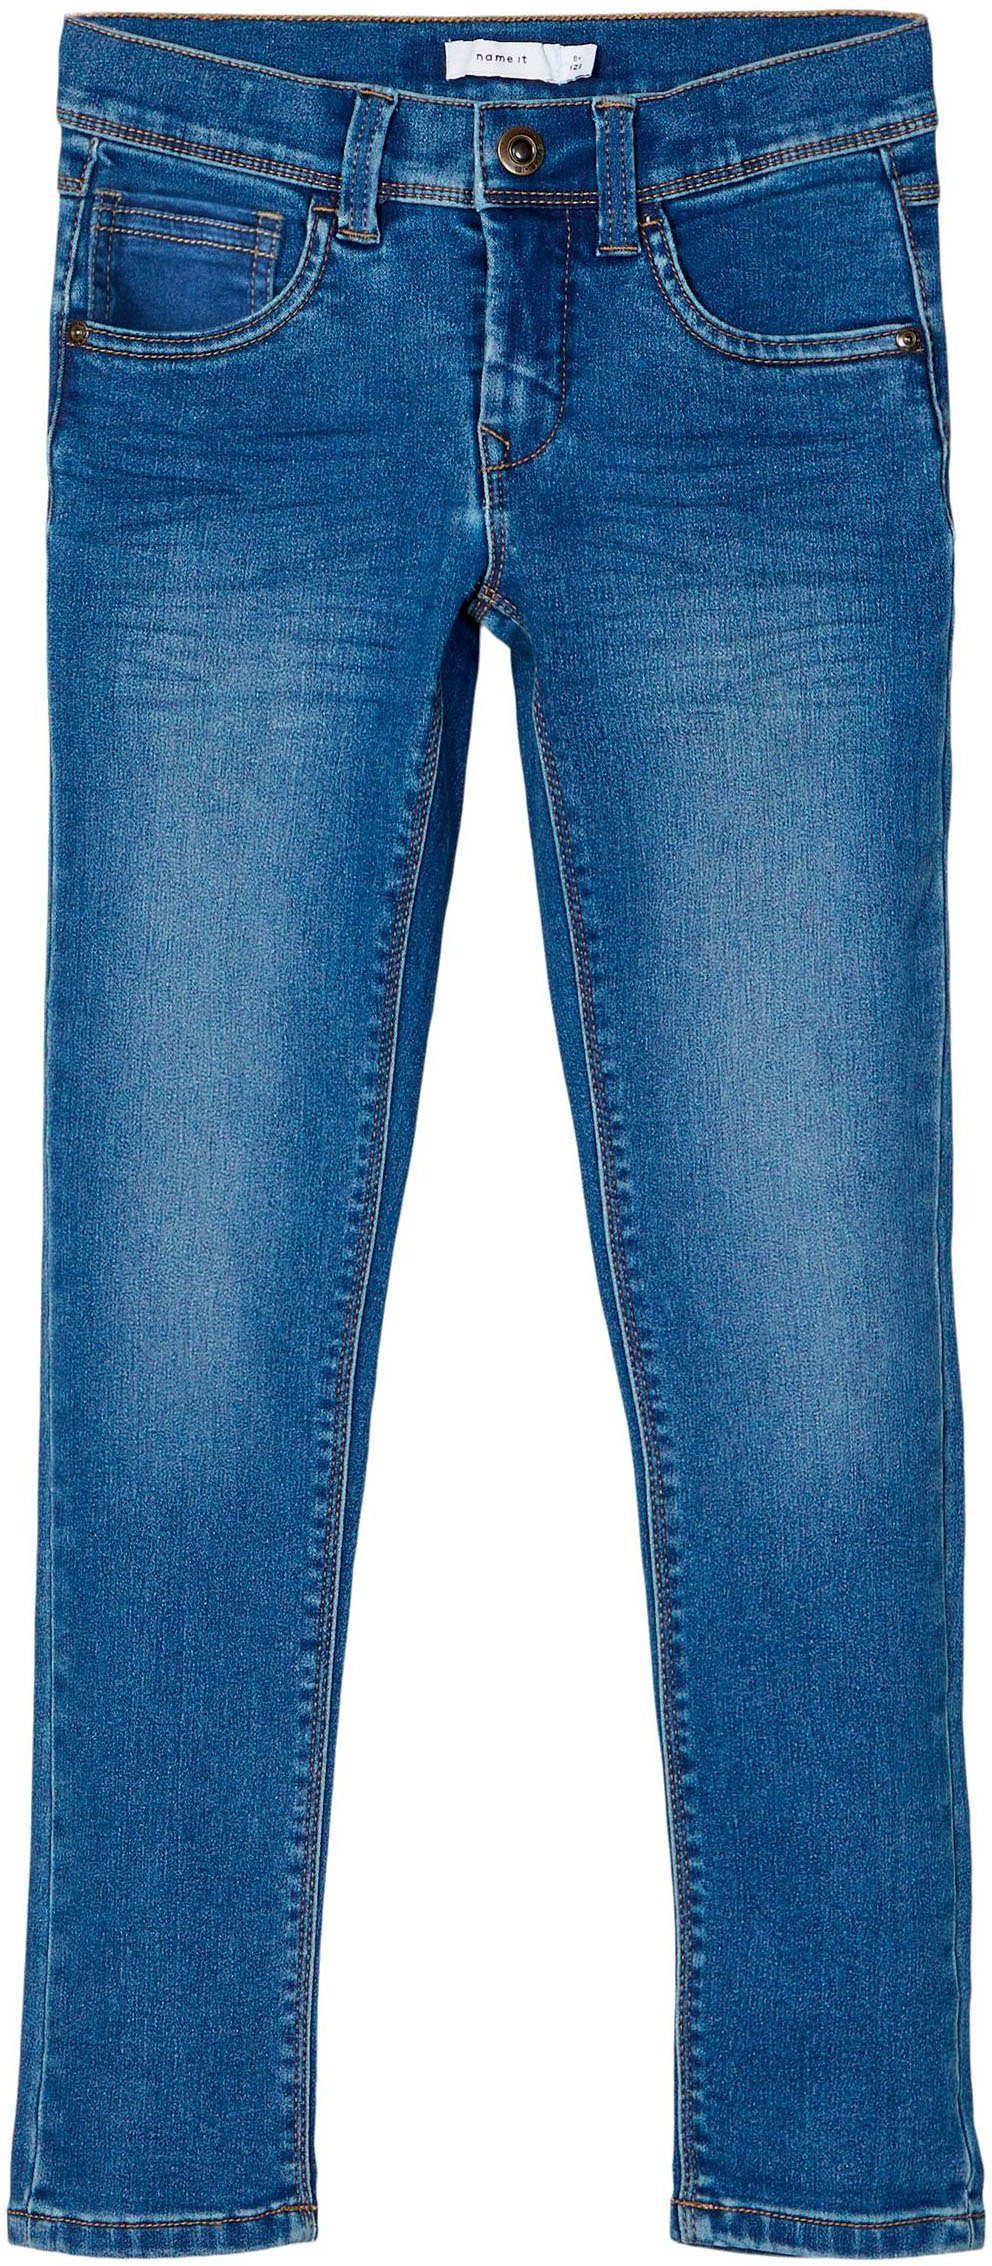 Waschung in cooler It 5-Pocket-Style Stretch-Jeans, Klassischer Name